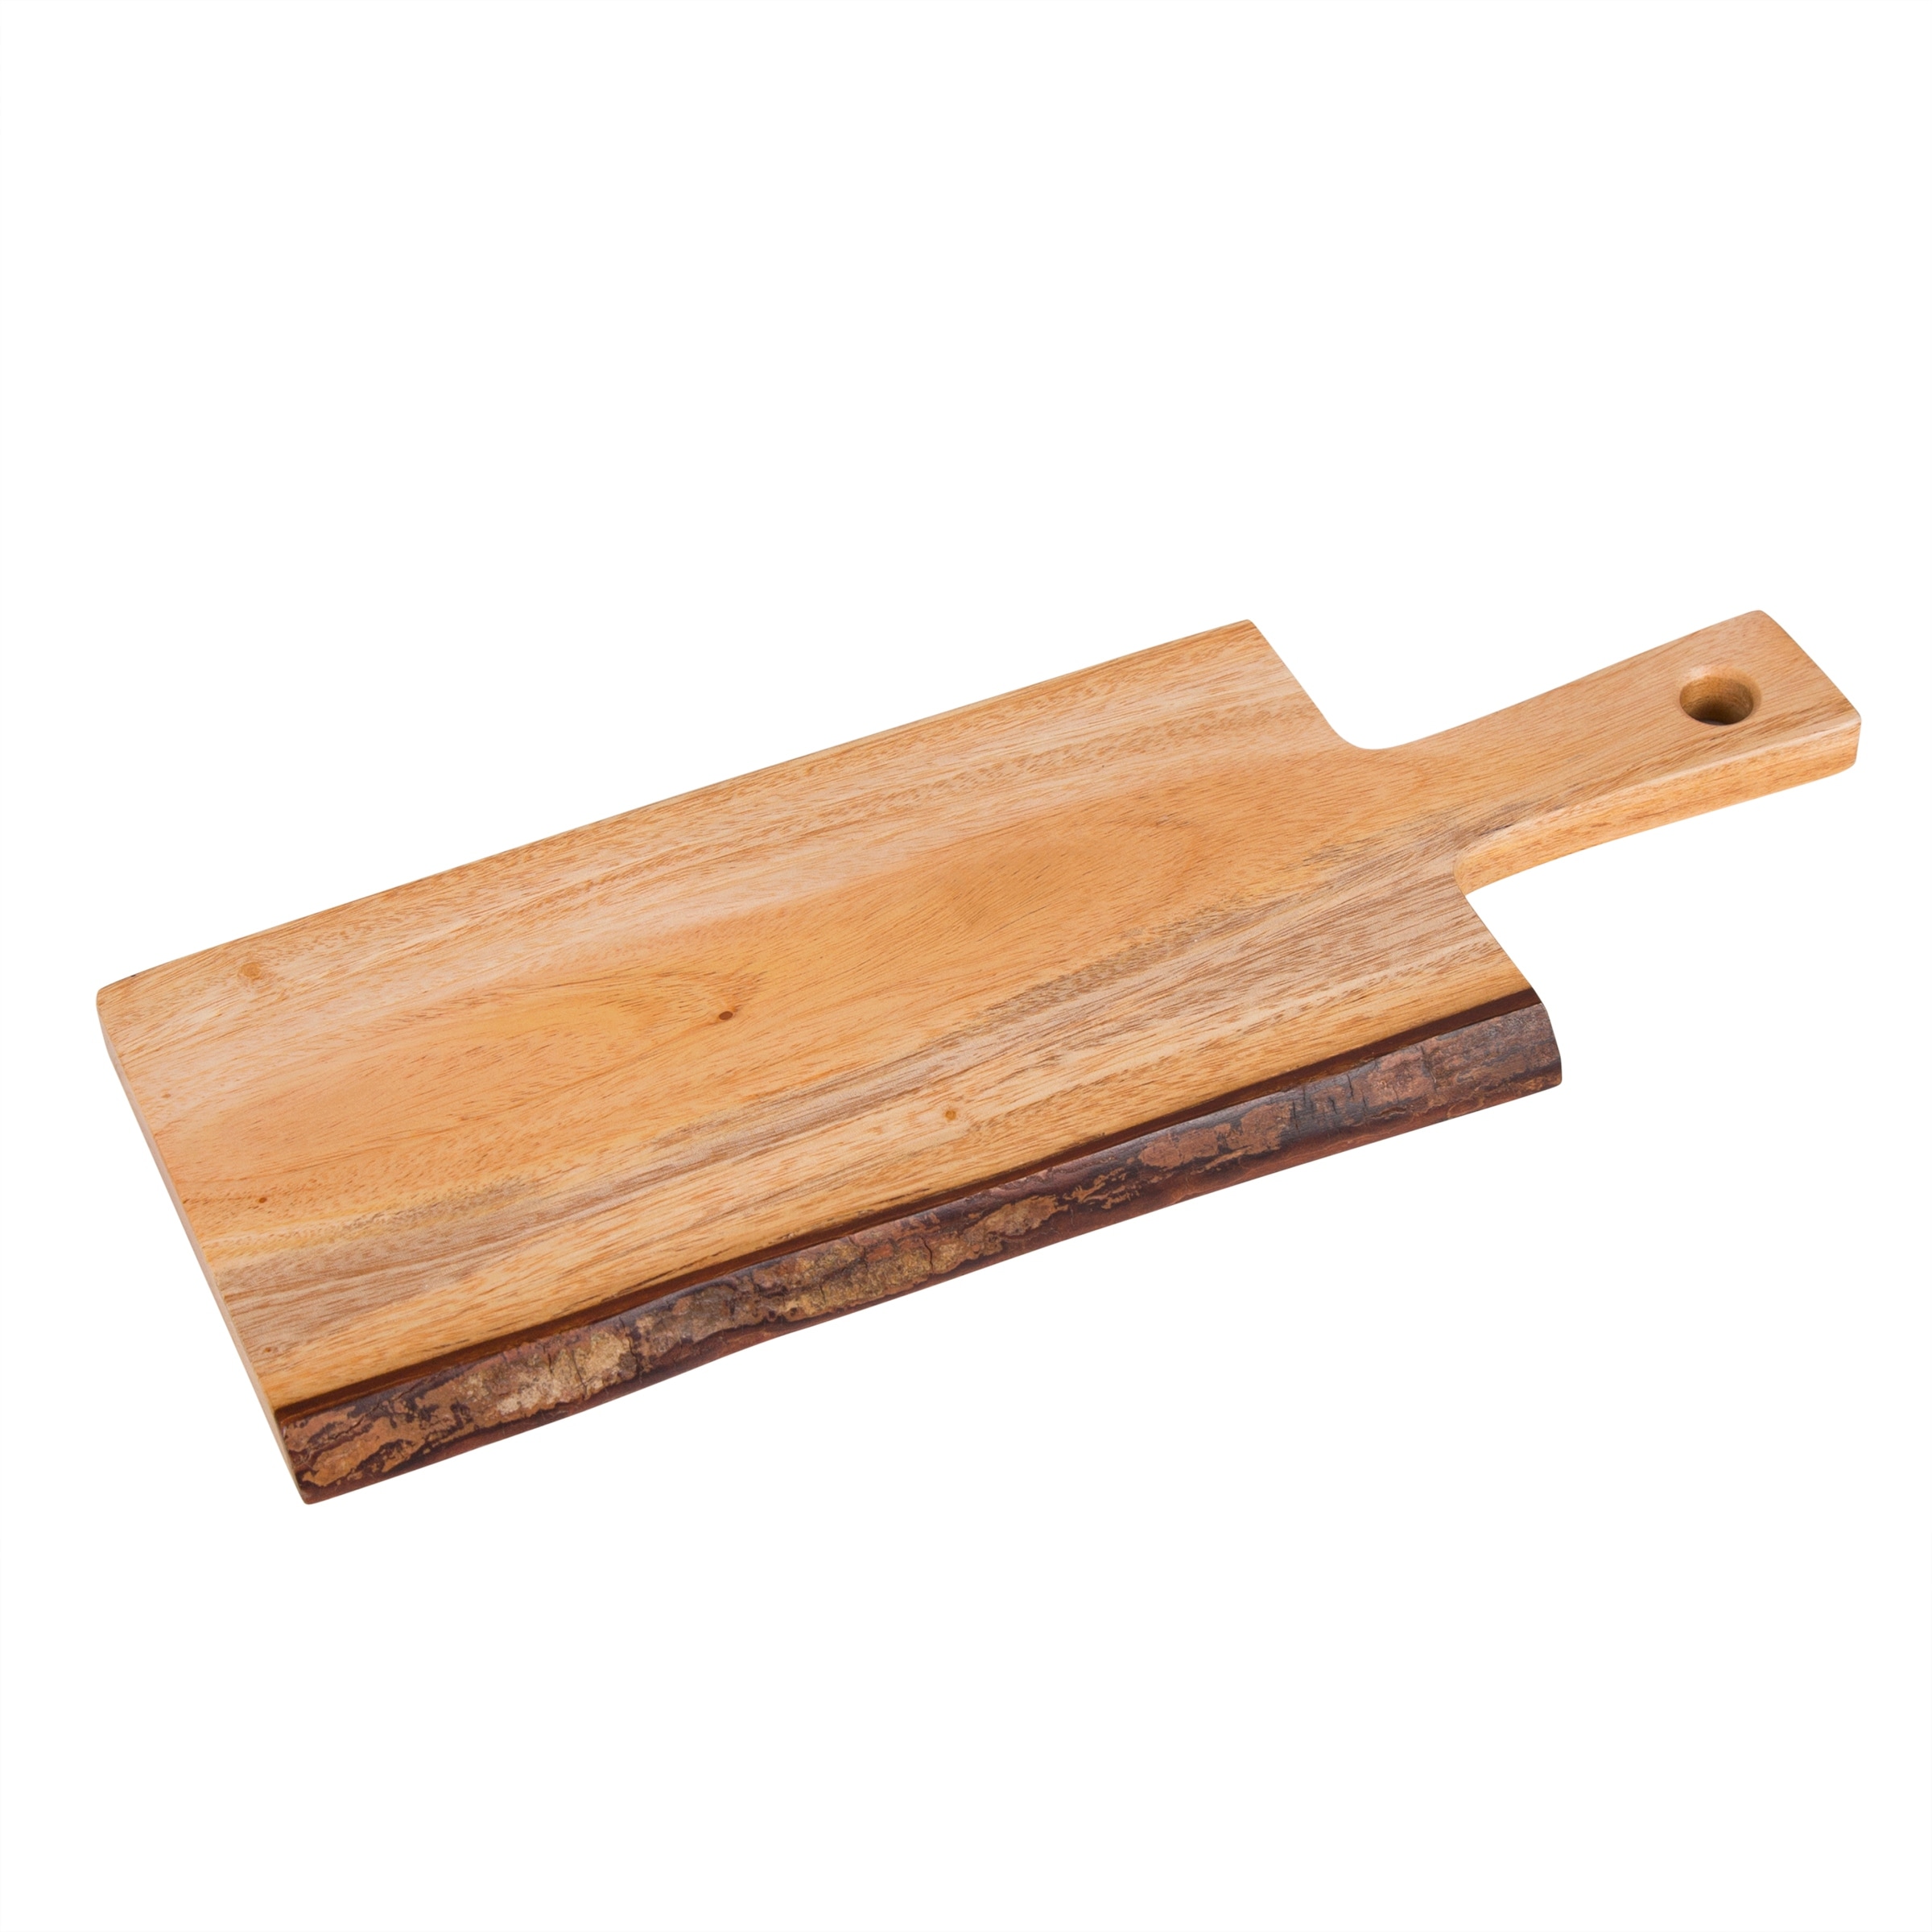 https://ak1.ostkcdn.com/images/products/is/images/direct/817ce003b296985e595fd35ceb493765b8c3db9d/Creative-Home-Solid-Wood-Serving-Board%2C-Cheese-Paddle-with-One-Side-Natural-Edge%2C-14%22-L-x-5%22-W.jpg